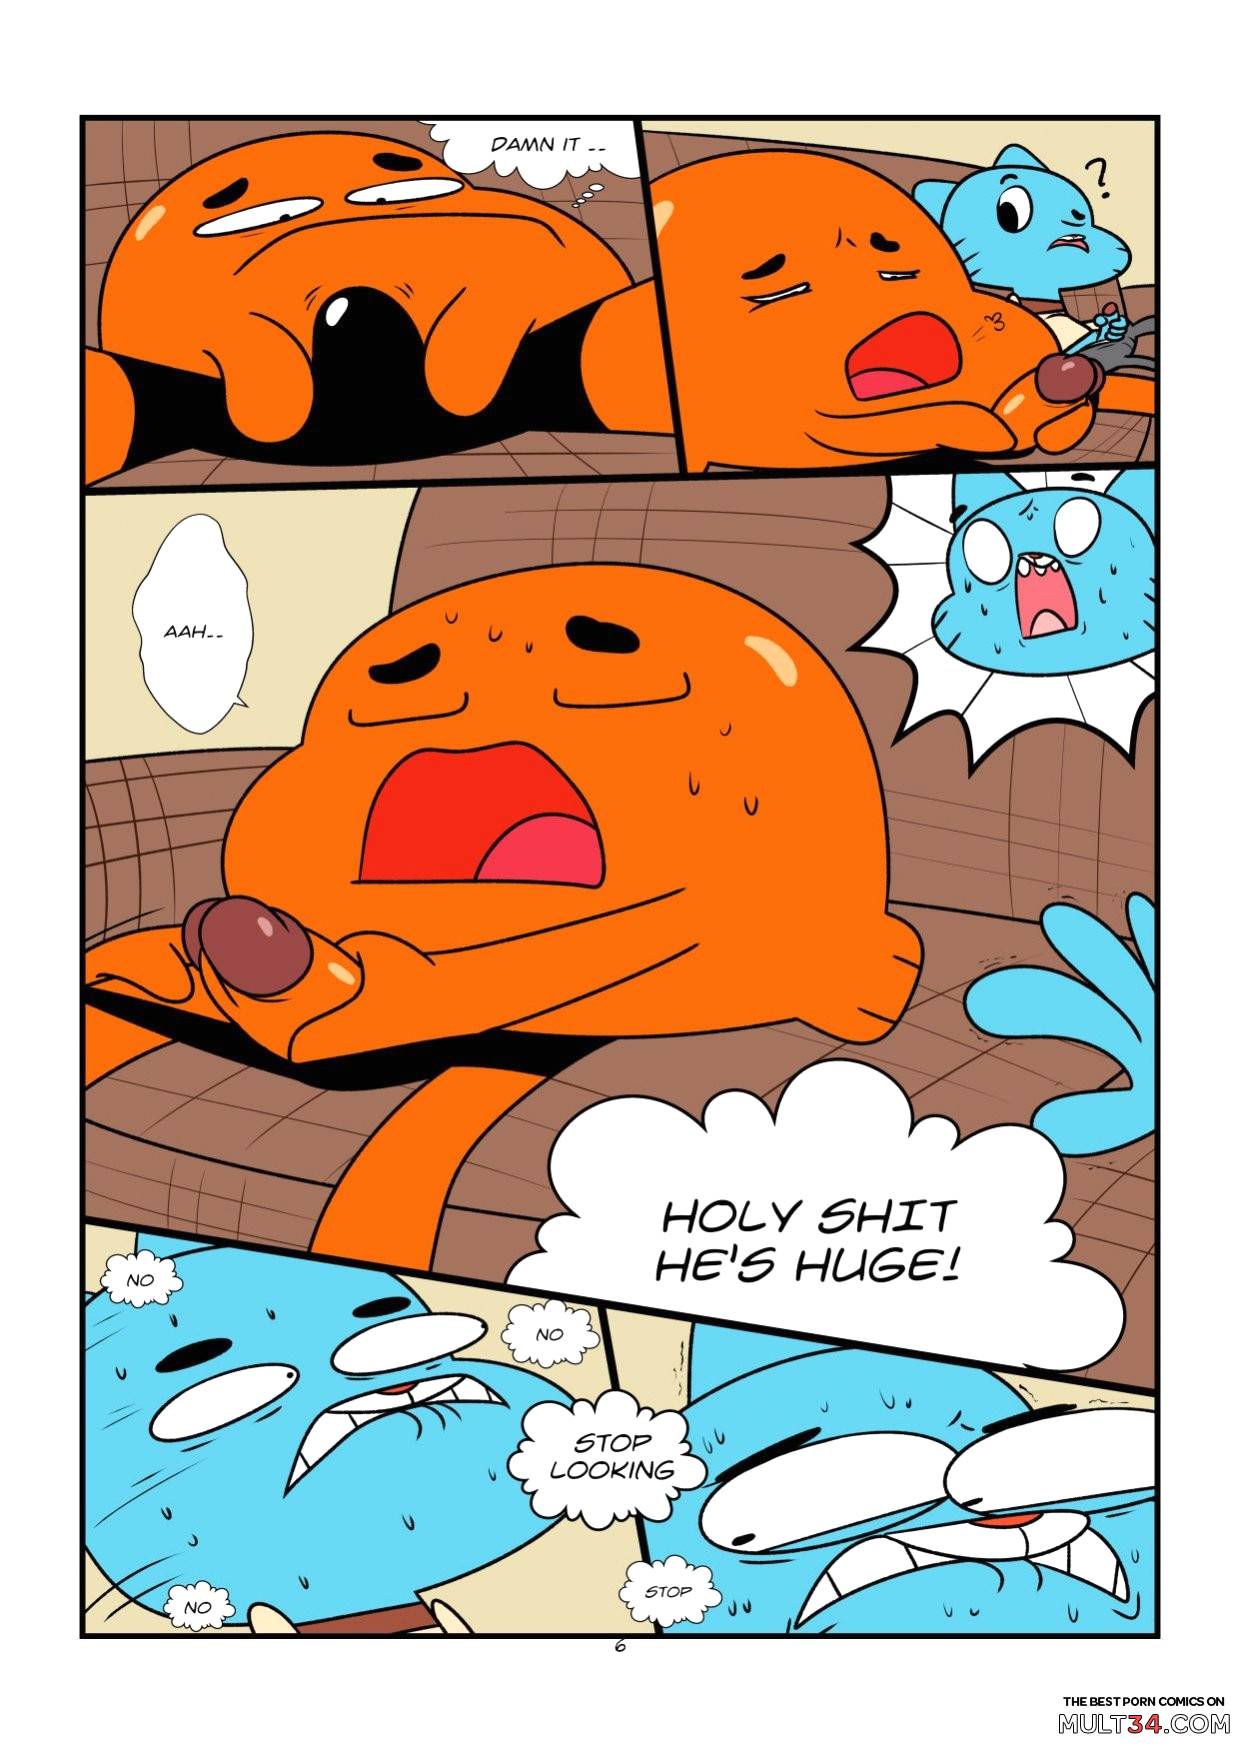 The Sexy World Of Gumball gay porn comic - the best cartoon porn comics,  Rule 34 | MULT34